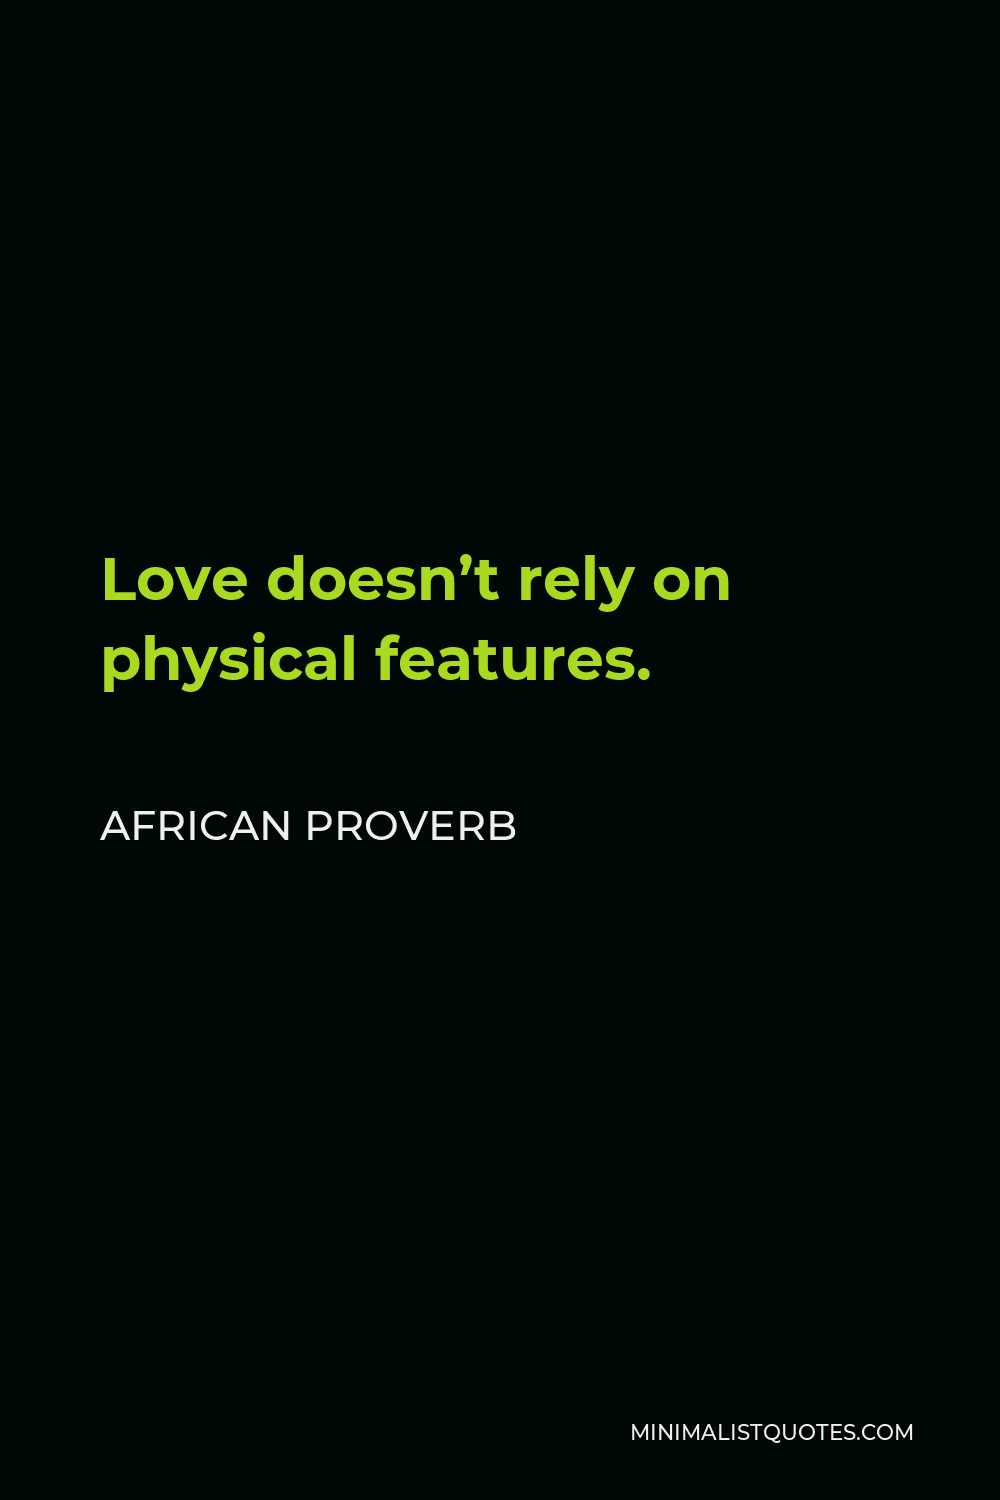 African Proverb Quote - Love doesn’t rely on physical features.